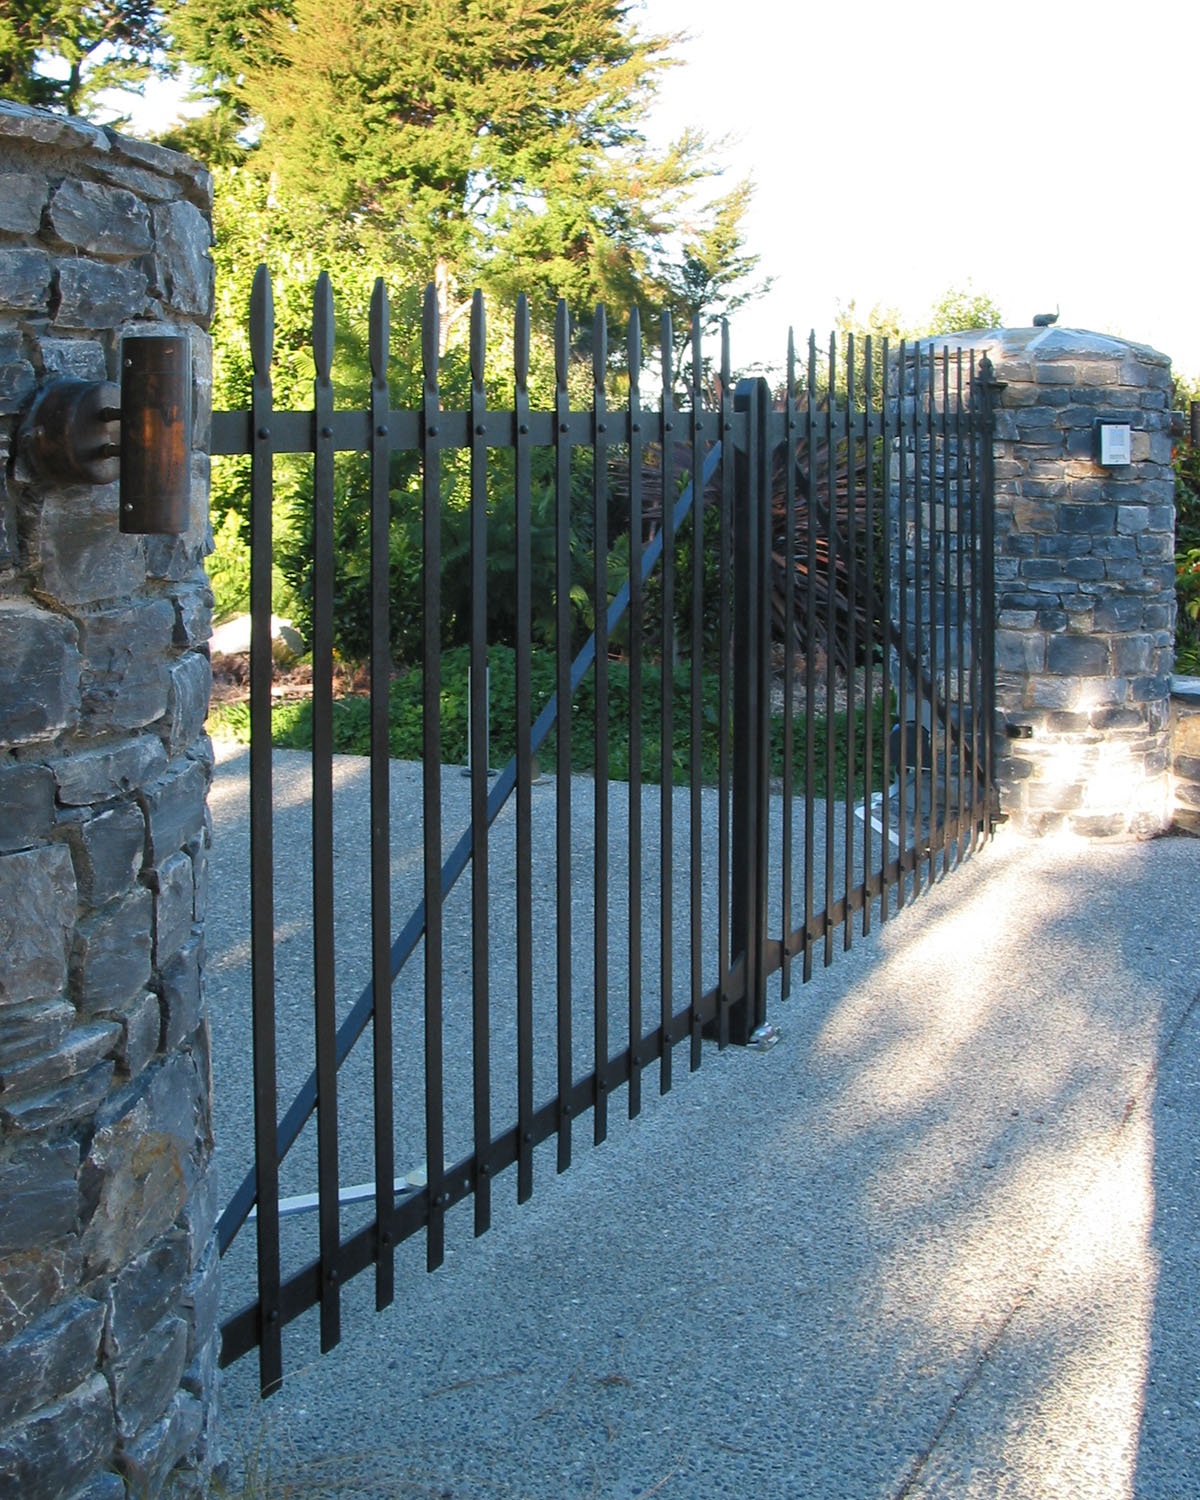 Riveted wrought iron driveway gates